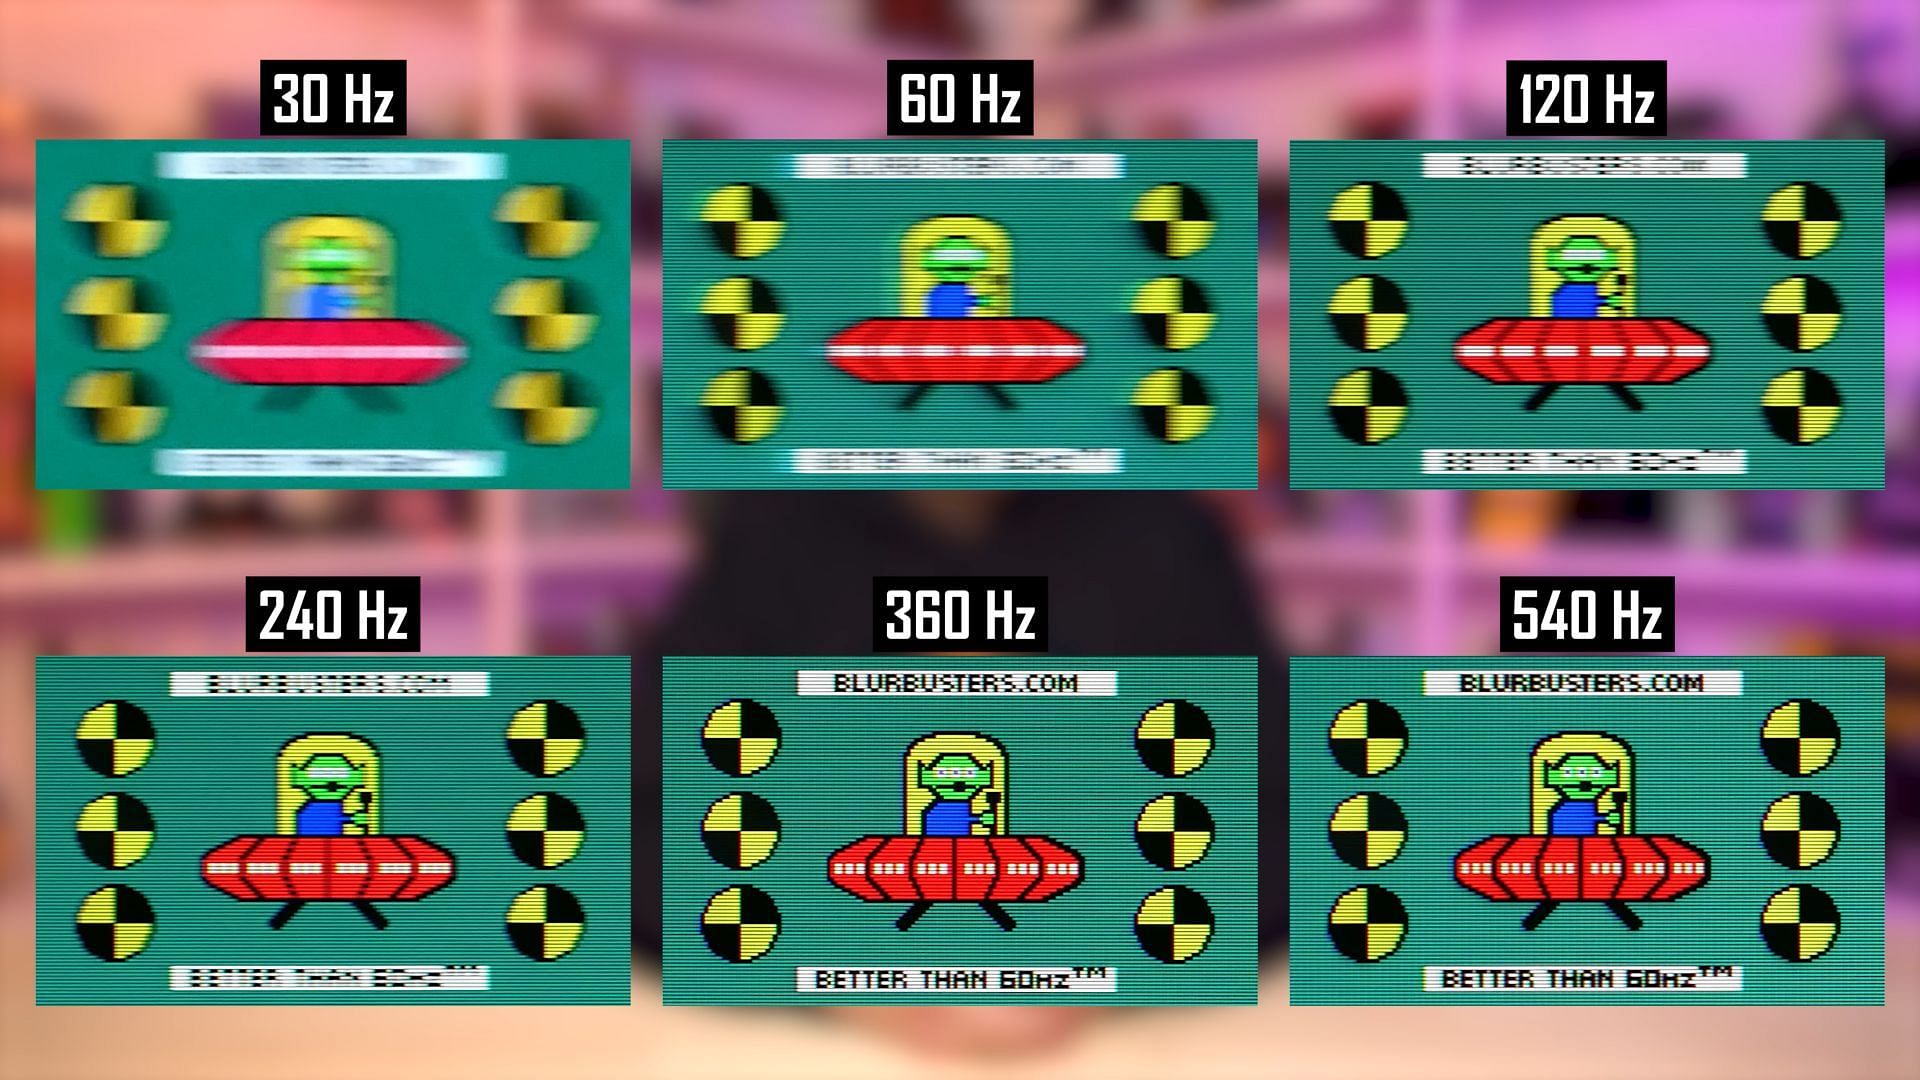 A comparison of ghosting and blur for various monitors ranging from 60 to 540 Hz (Image via Hardware Unboxed/YouTube)